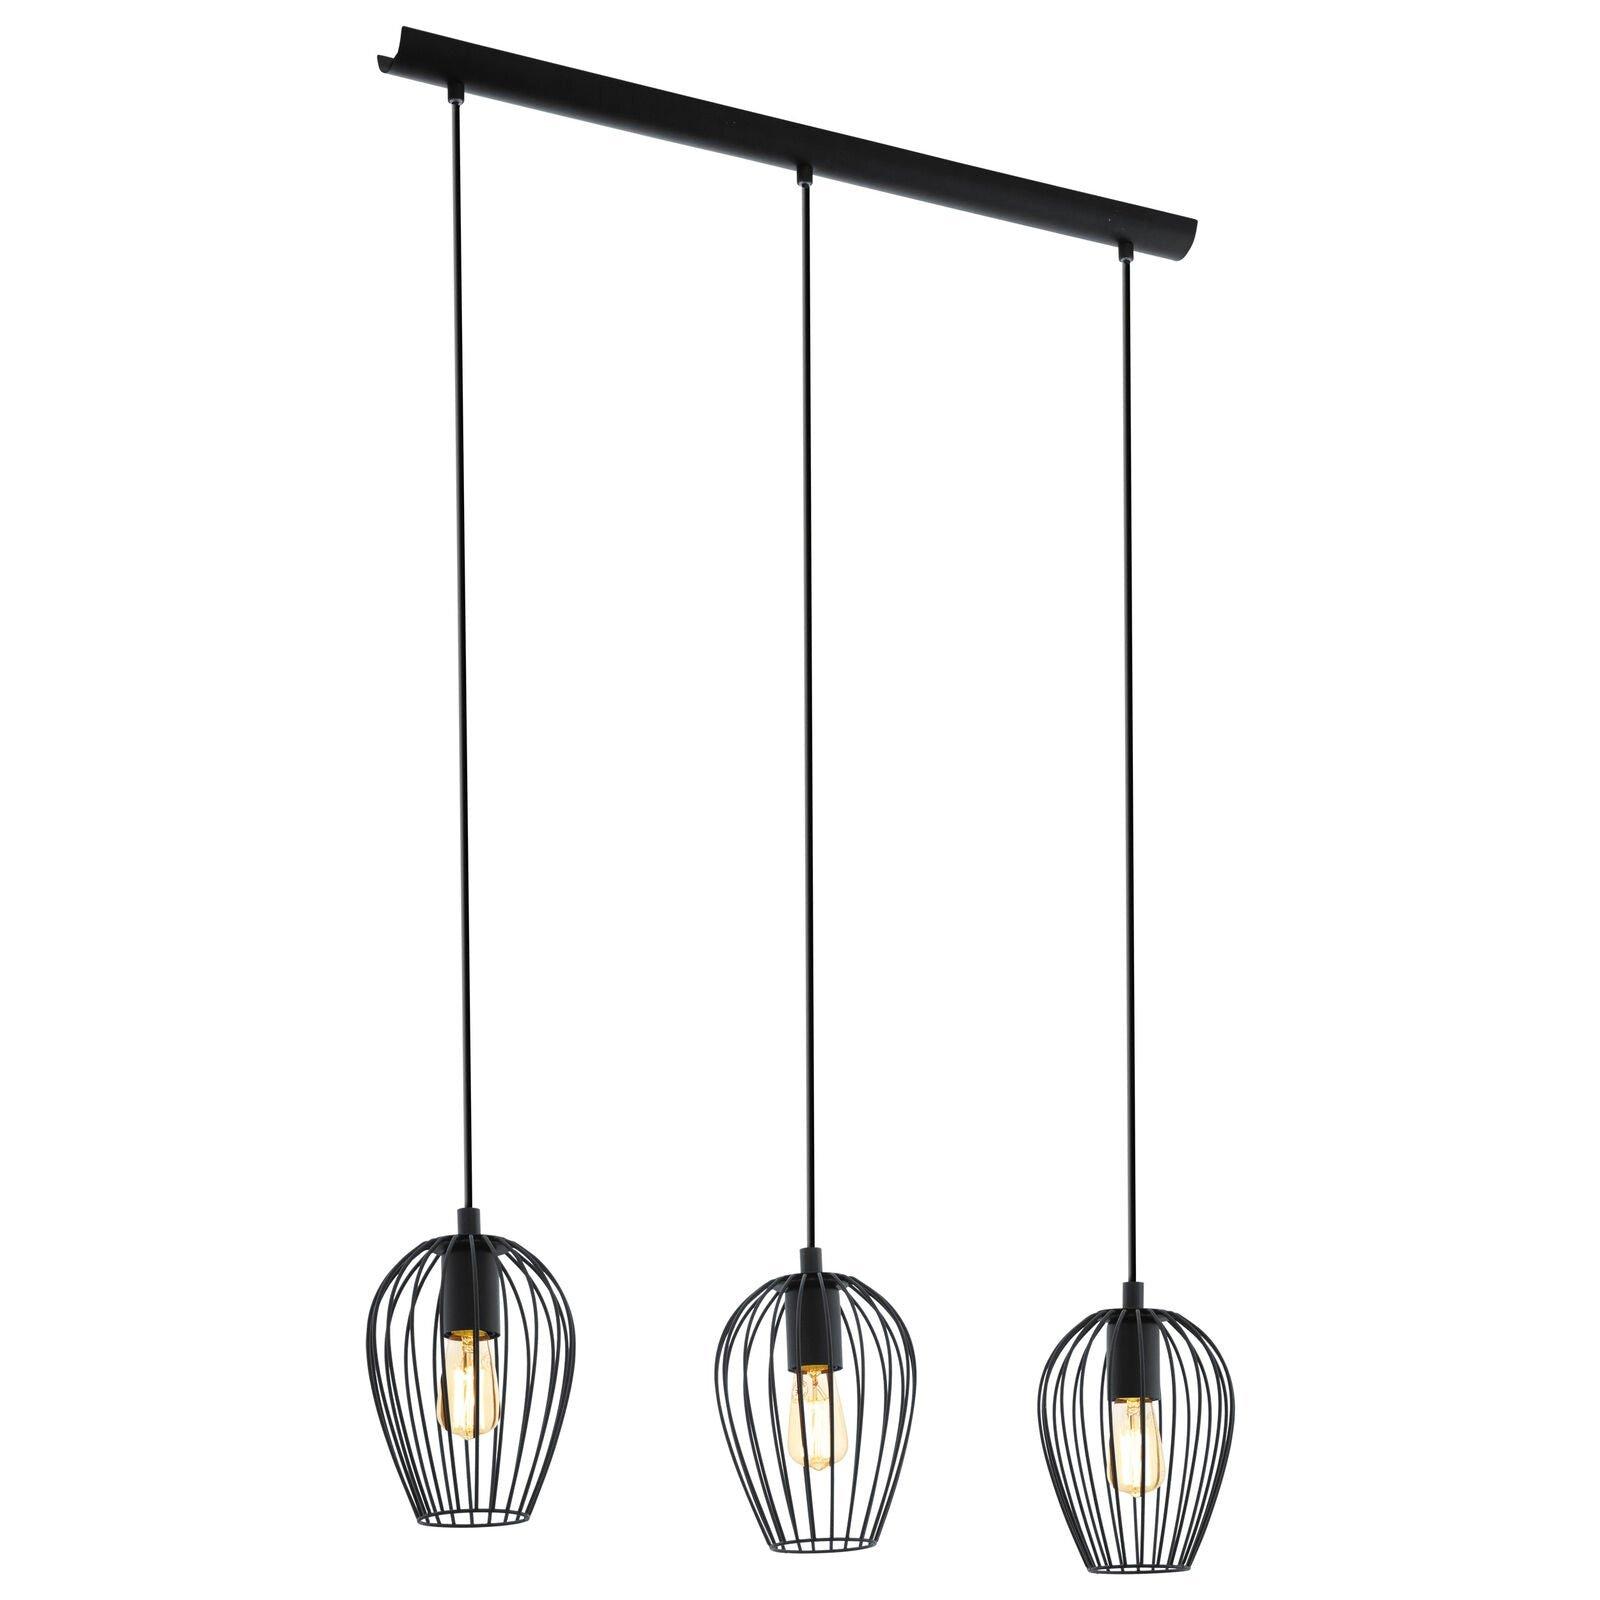 Hanging Ceiling Pendant Light Black Wire Cage 3x 60W E27 Kitchen Island Dining